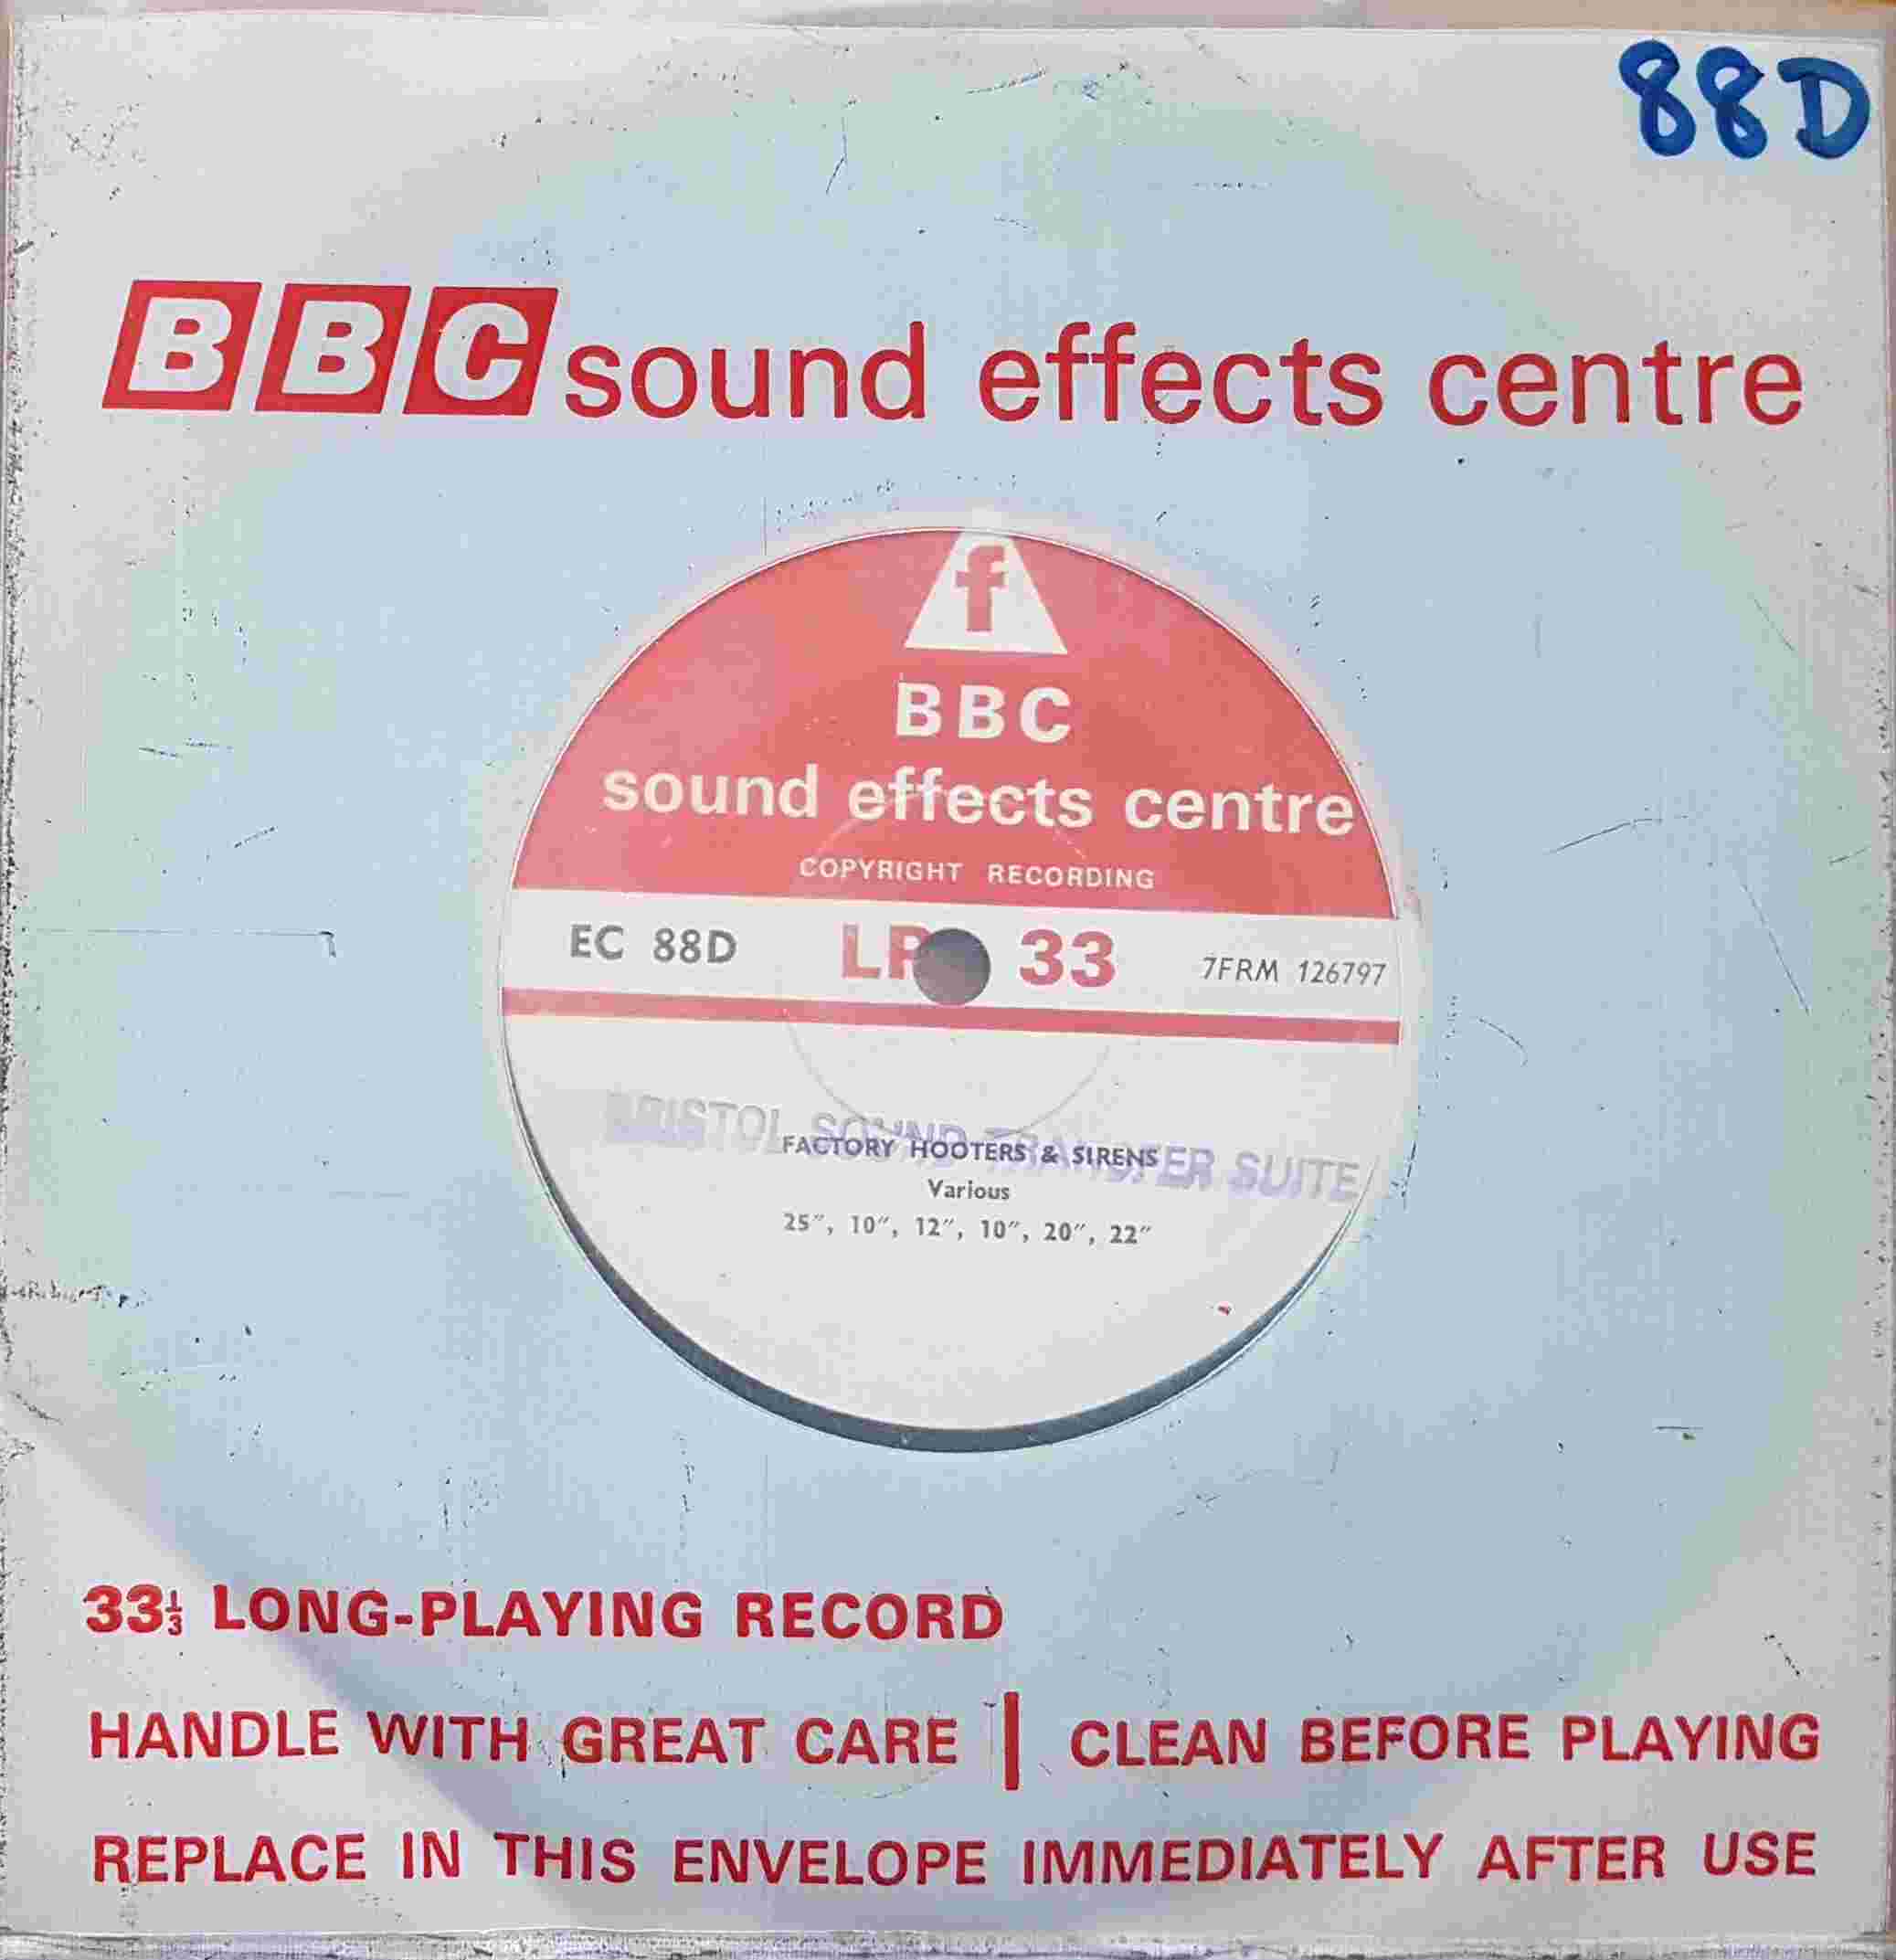 Picture of EC 88D Factory hooters & sirens by artist Not registered from the BBC singles - Records and Tapes library